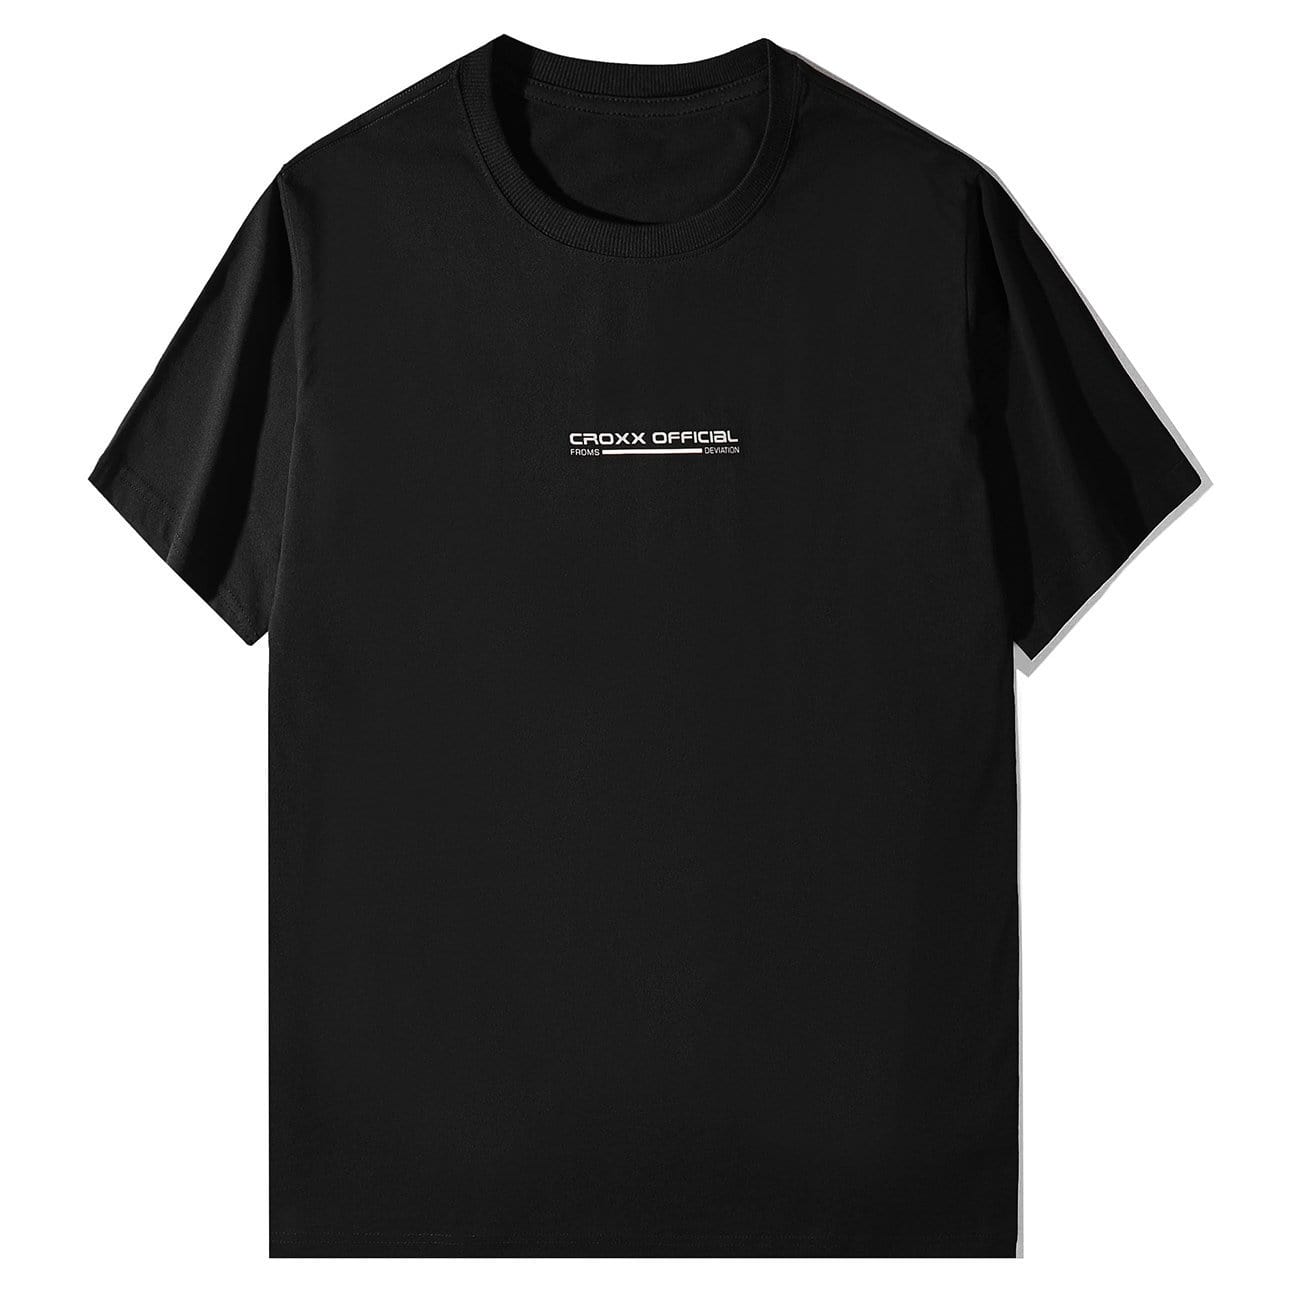 WLS Functional Reflective Strip Print Cotton Tee